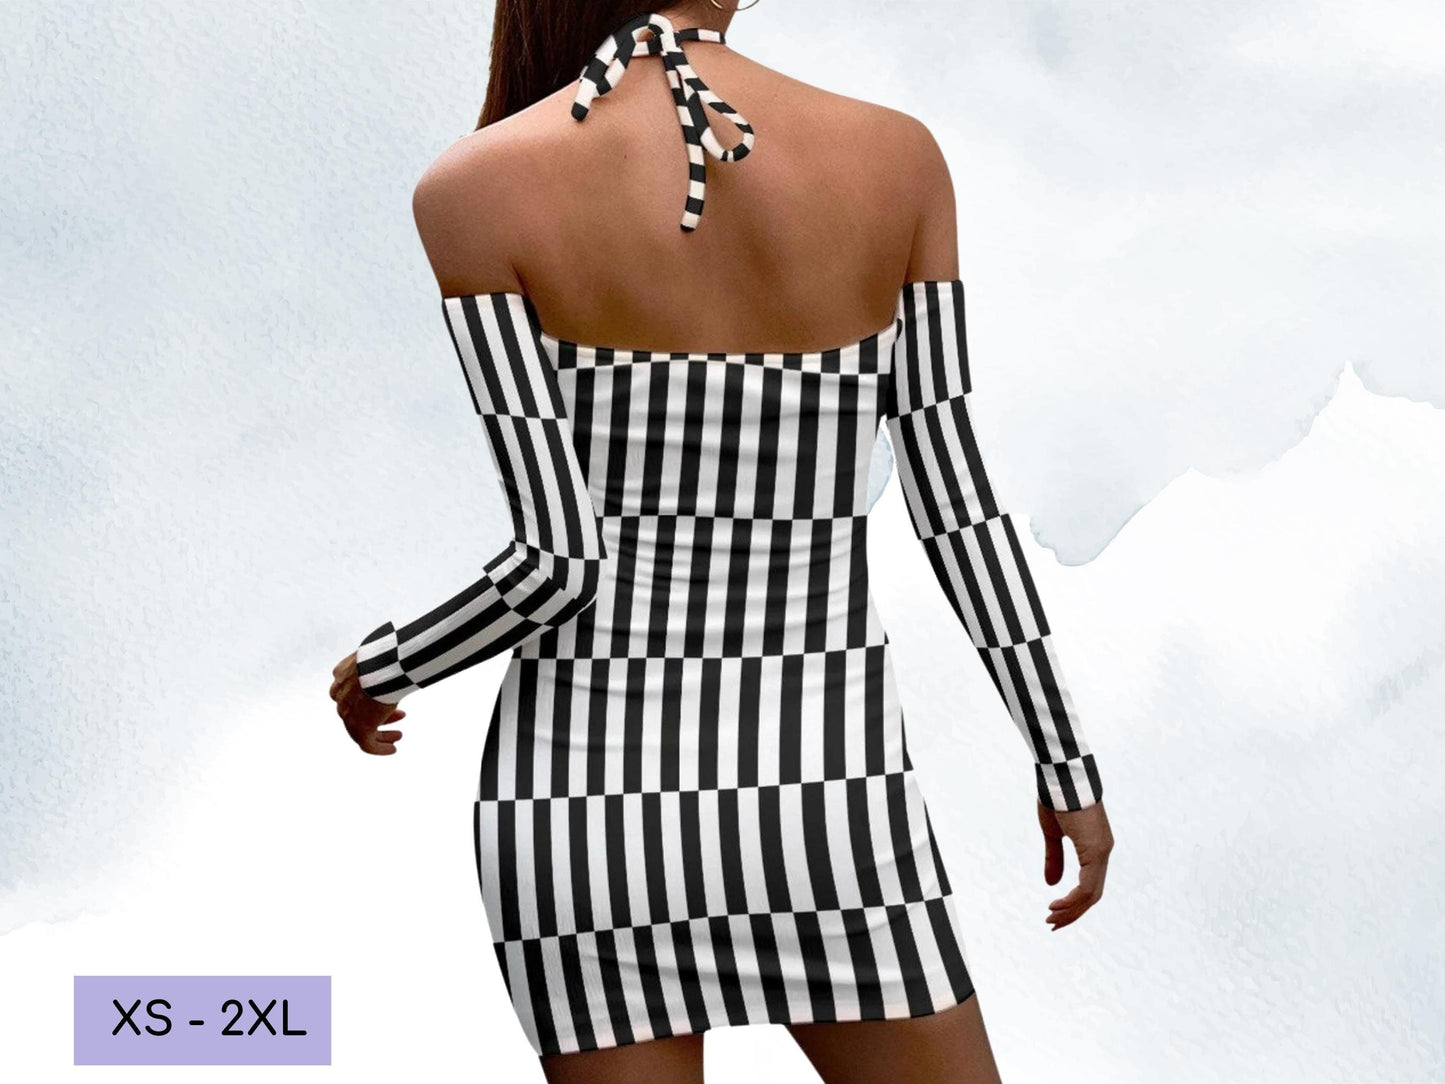 BeetleJuice Inspired Sexy Women's Halter Lace-up Dress, Cosplay Dress, Adult Halloween Costume, Gift for Her, Halloween Dress, Fantasy